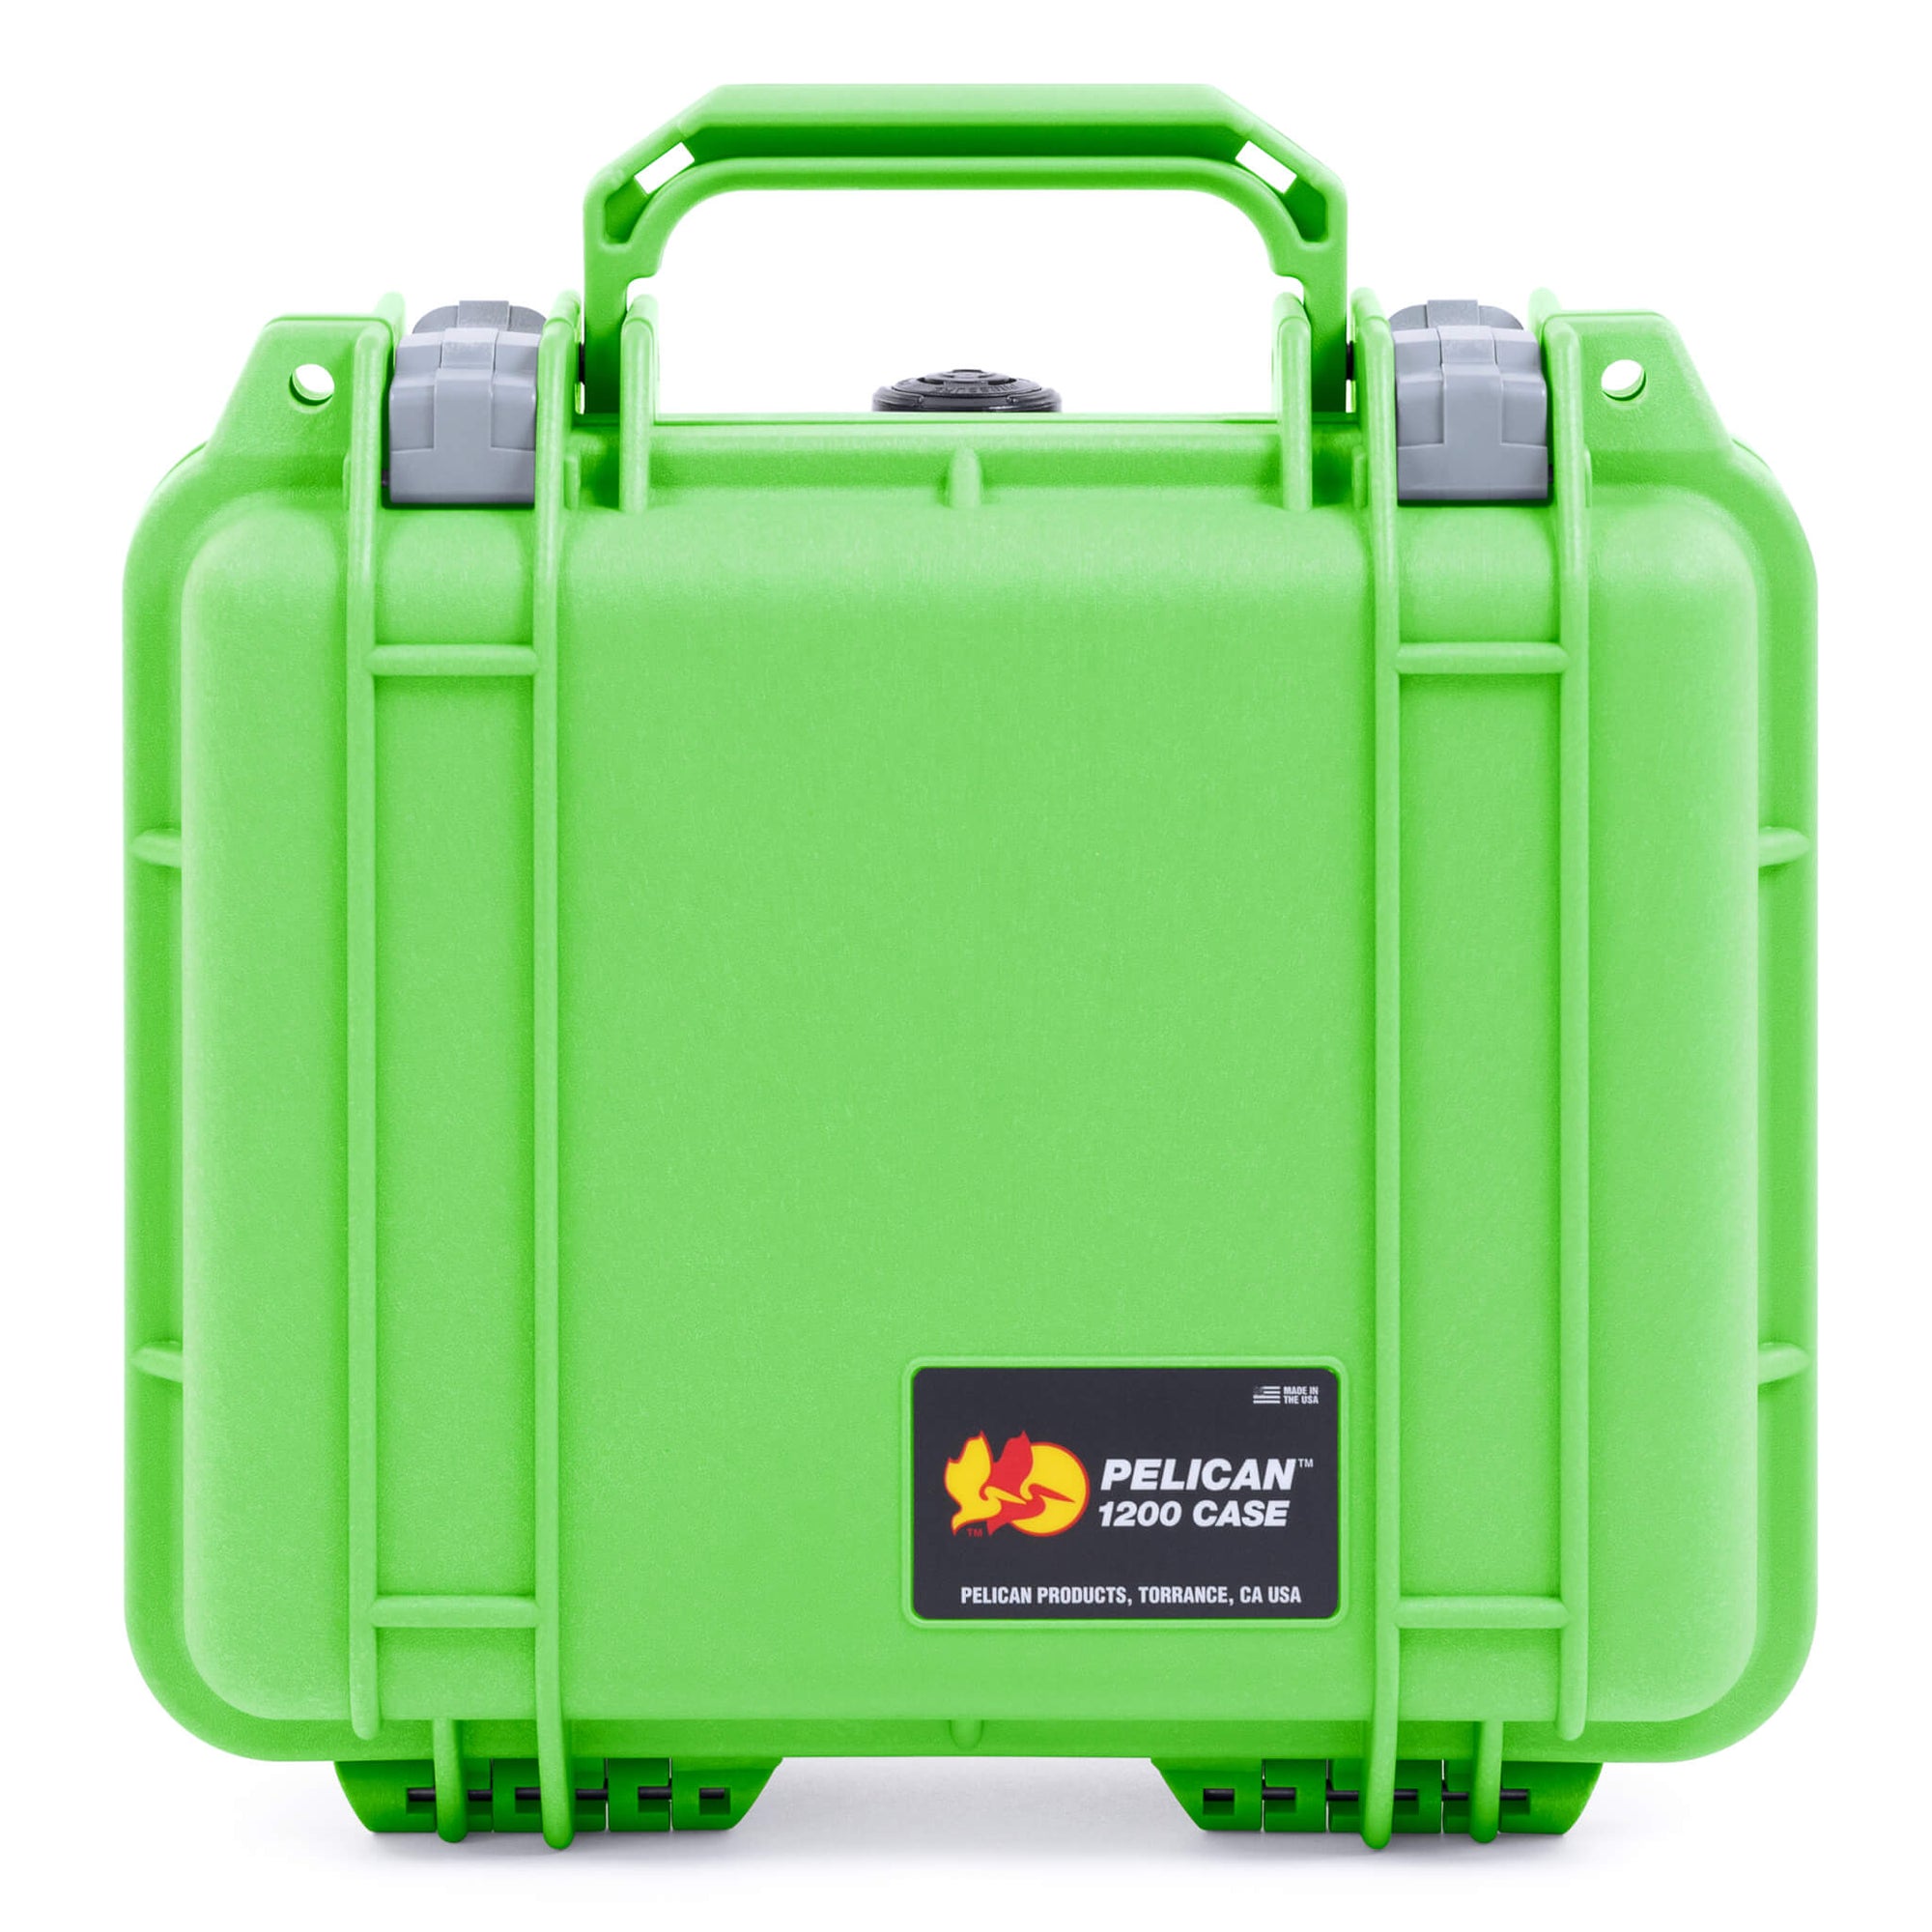 What Is A Peli Case? A Lifetime Warranty? From Cases UK